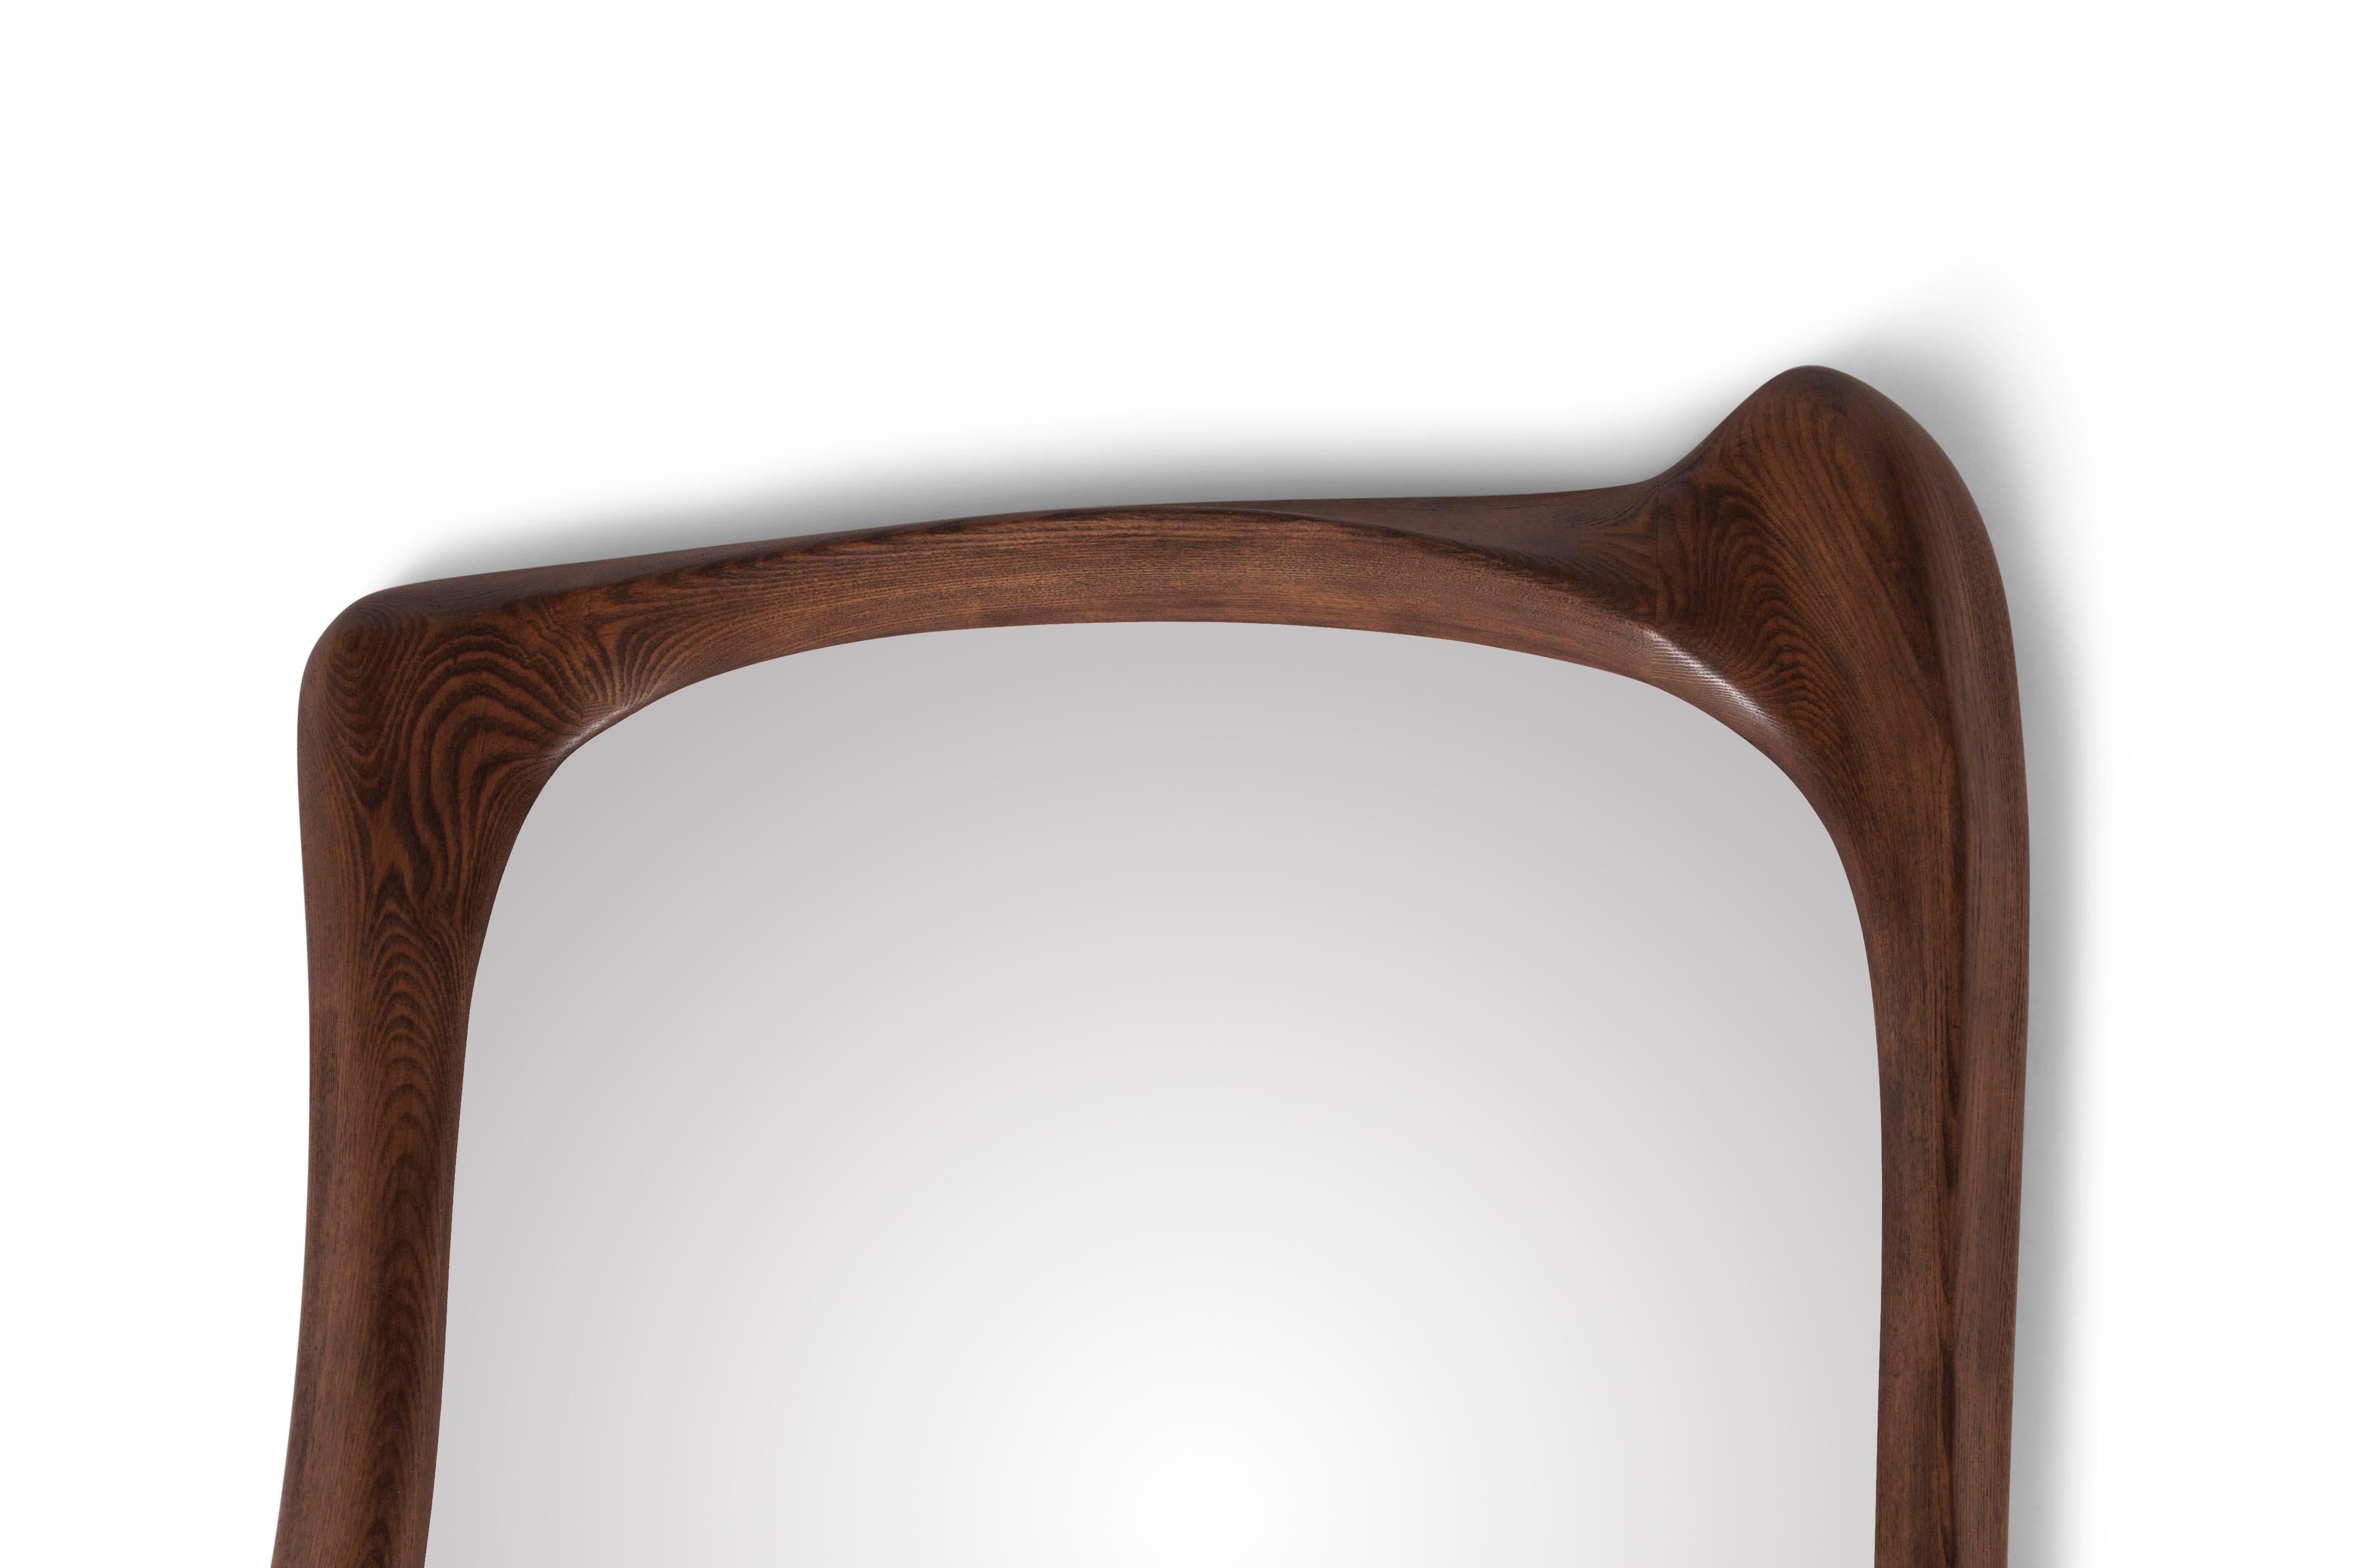 American Amorph Narcissus Mirror in Graphite Walnut stain on Ash wood For Sale